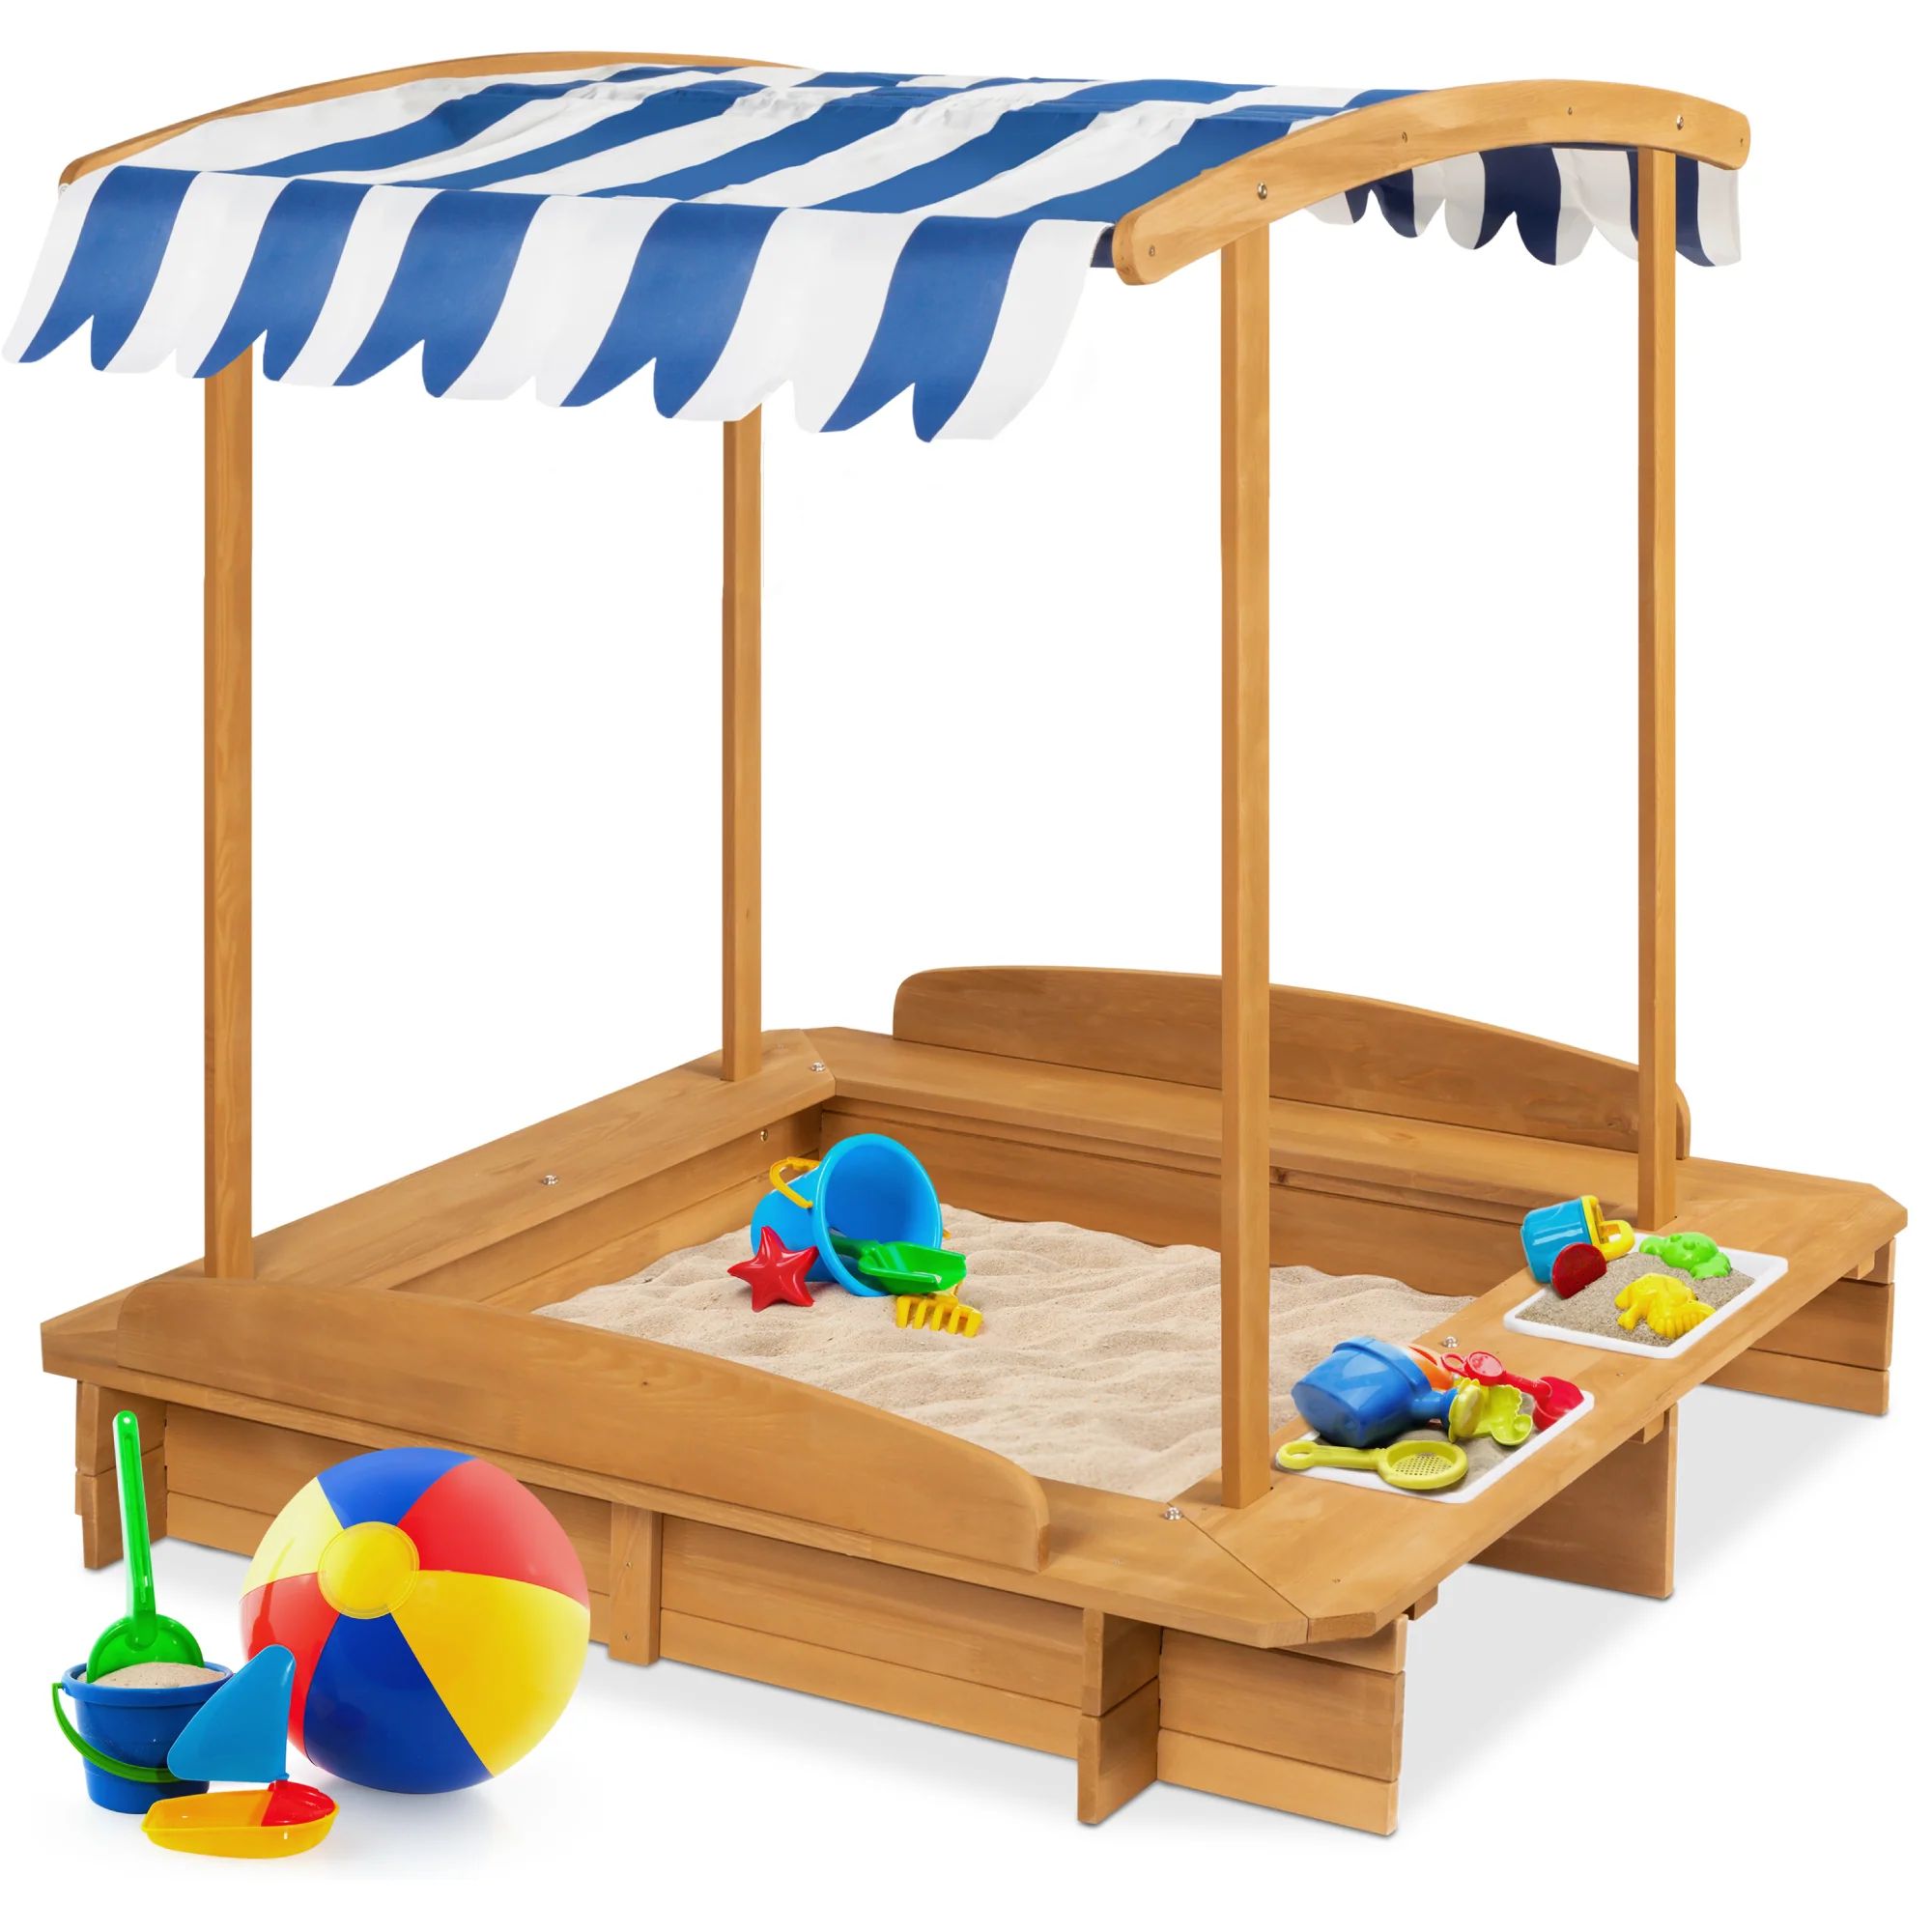 Kids Wooden Cabana Sandbox w/ Benches, Canopy Shade, Sand Cover, 2 Buc | Best Choice Products 